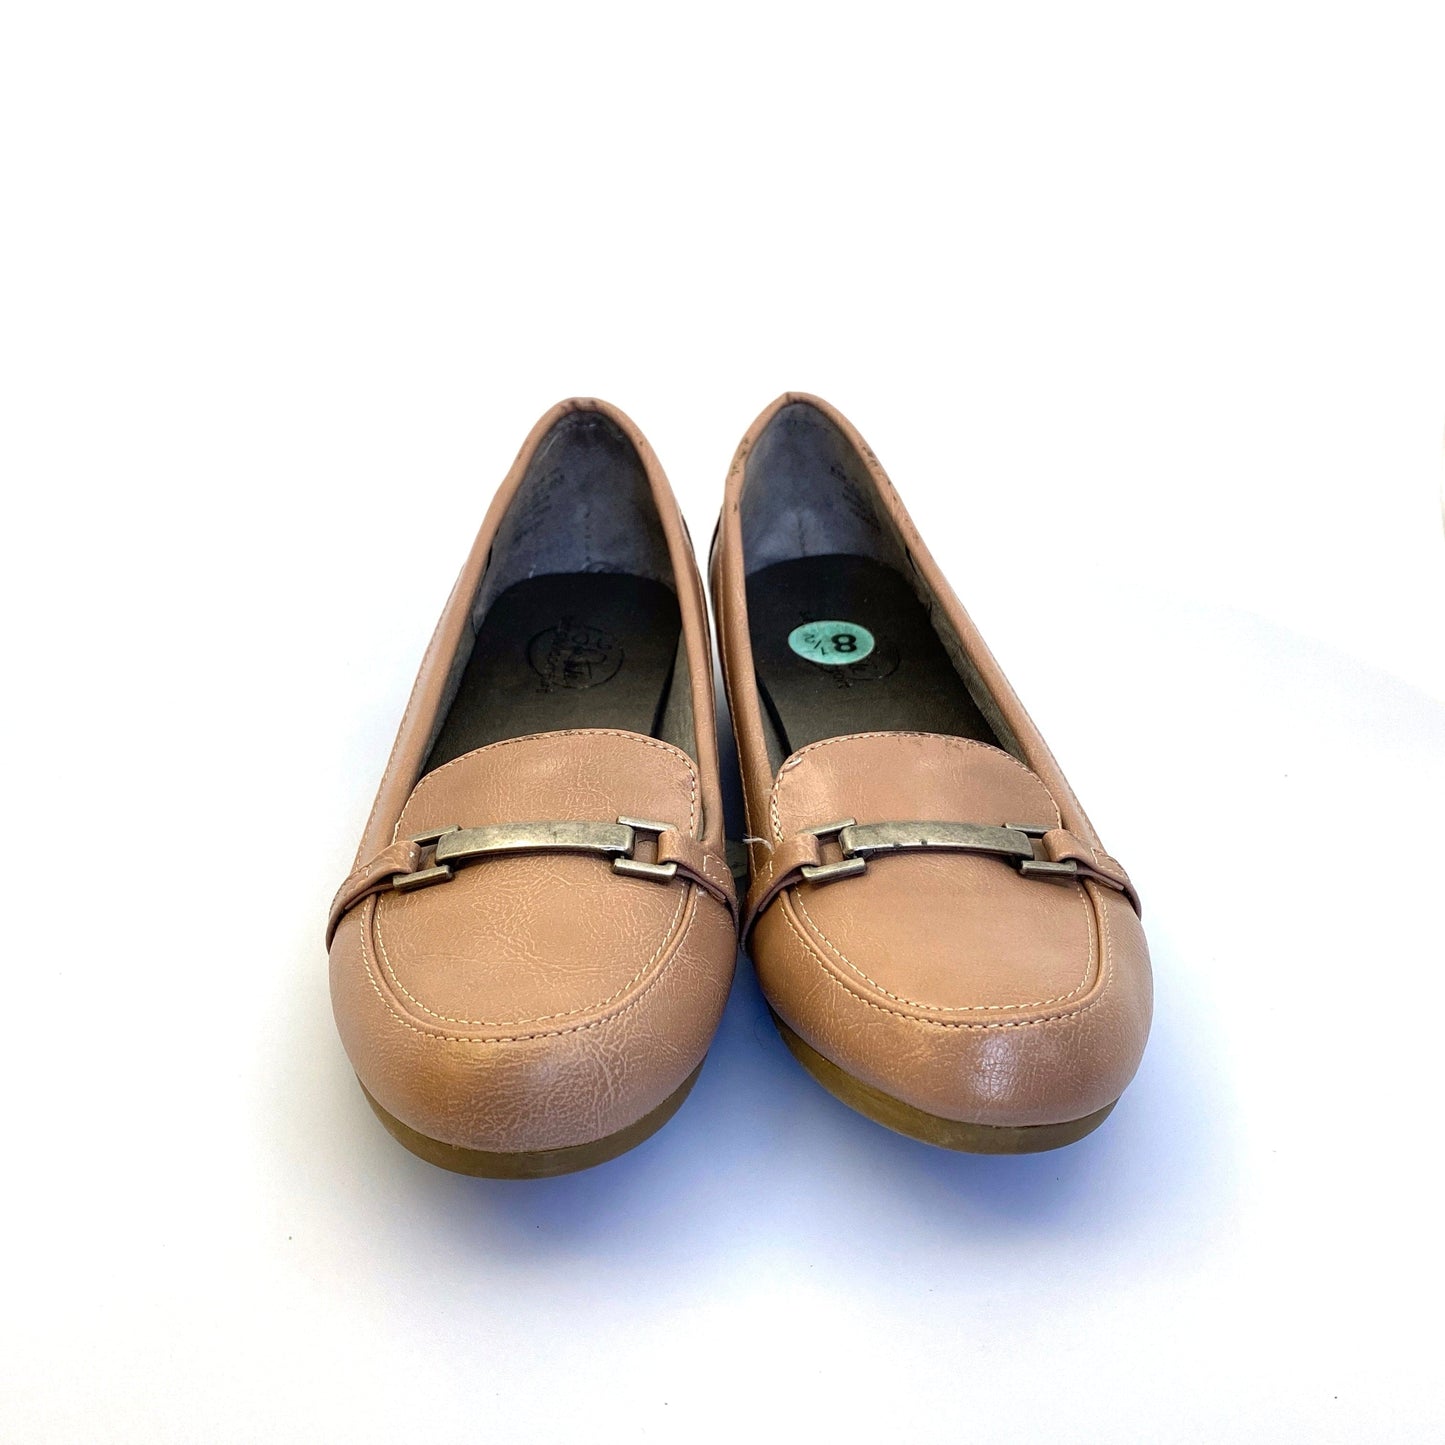 Comfortable Life Stride Size 8.5 Tan Brown Dress Loafers EUC